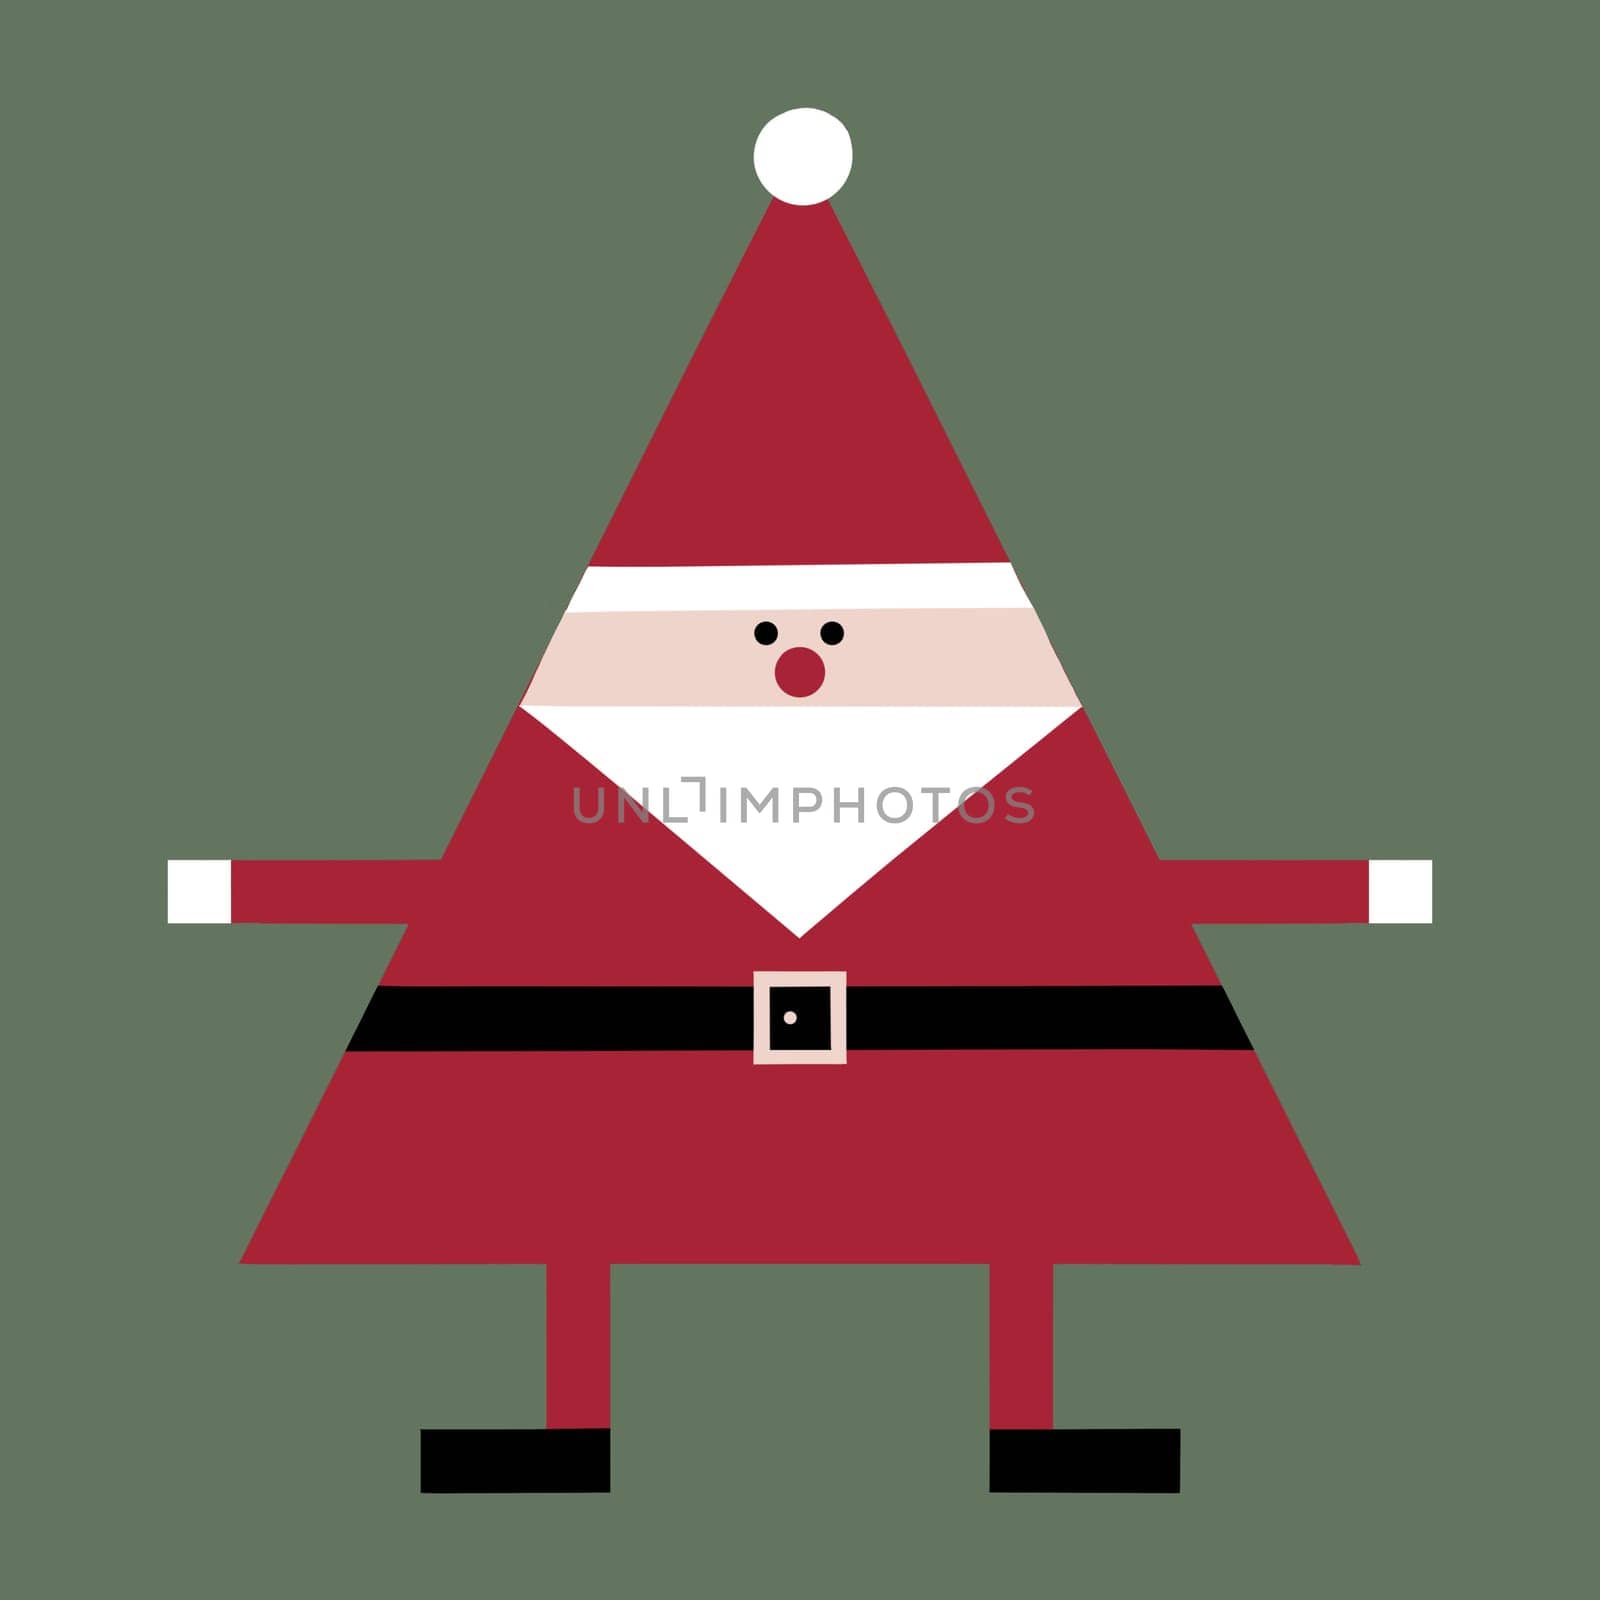 Quirky geometric Santa illustration by RusticPuffin